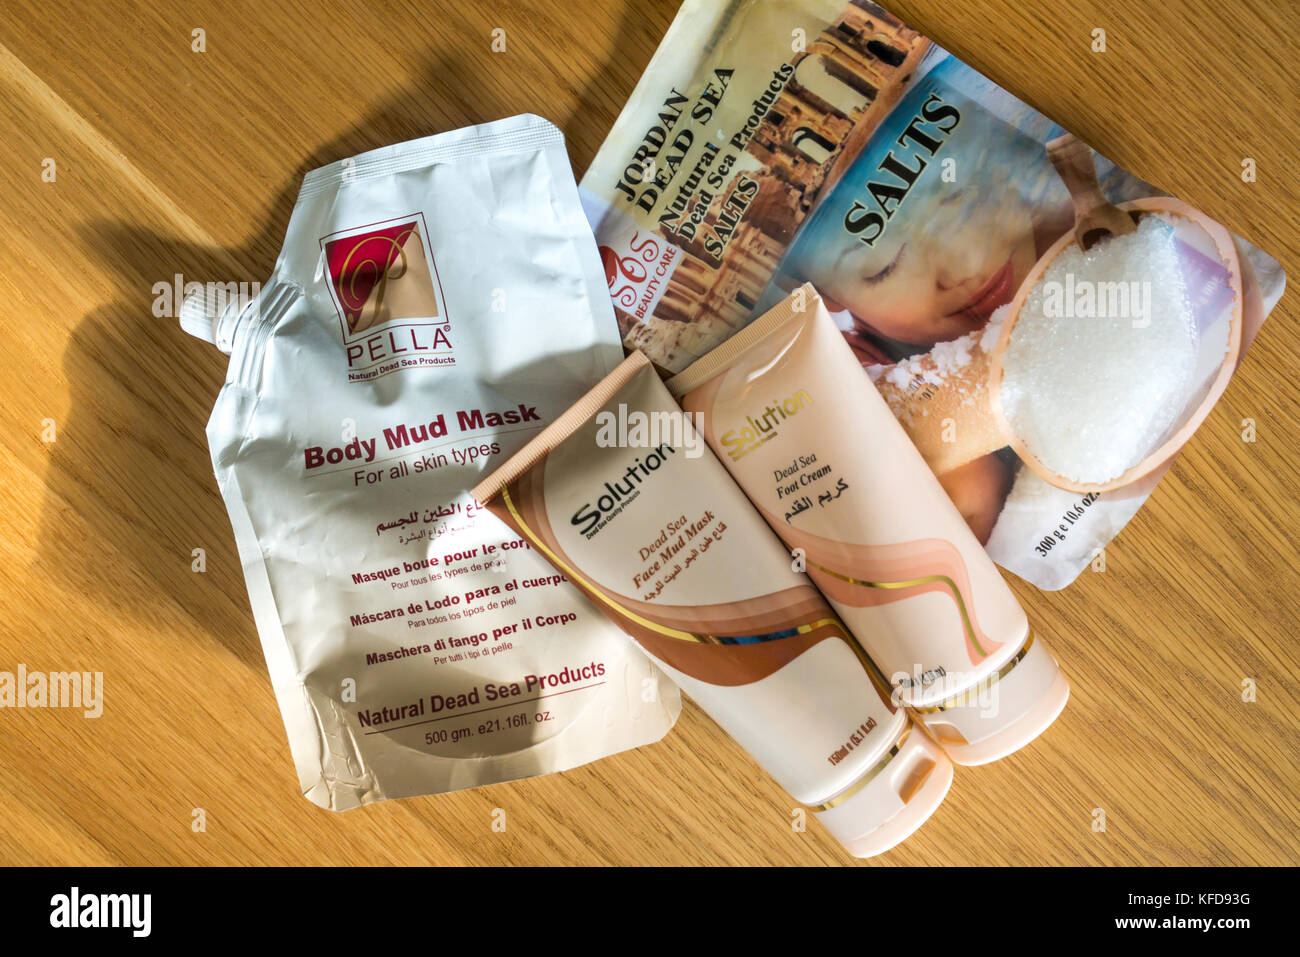 Holiday souvenirs of cosmetic products from the Dead Sea, Jordan, including bath salts, foot cream, body mud mask, and face mud mask Stock Photo